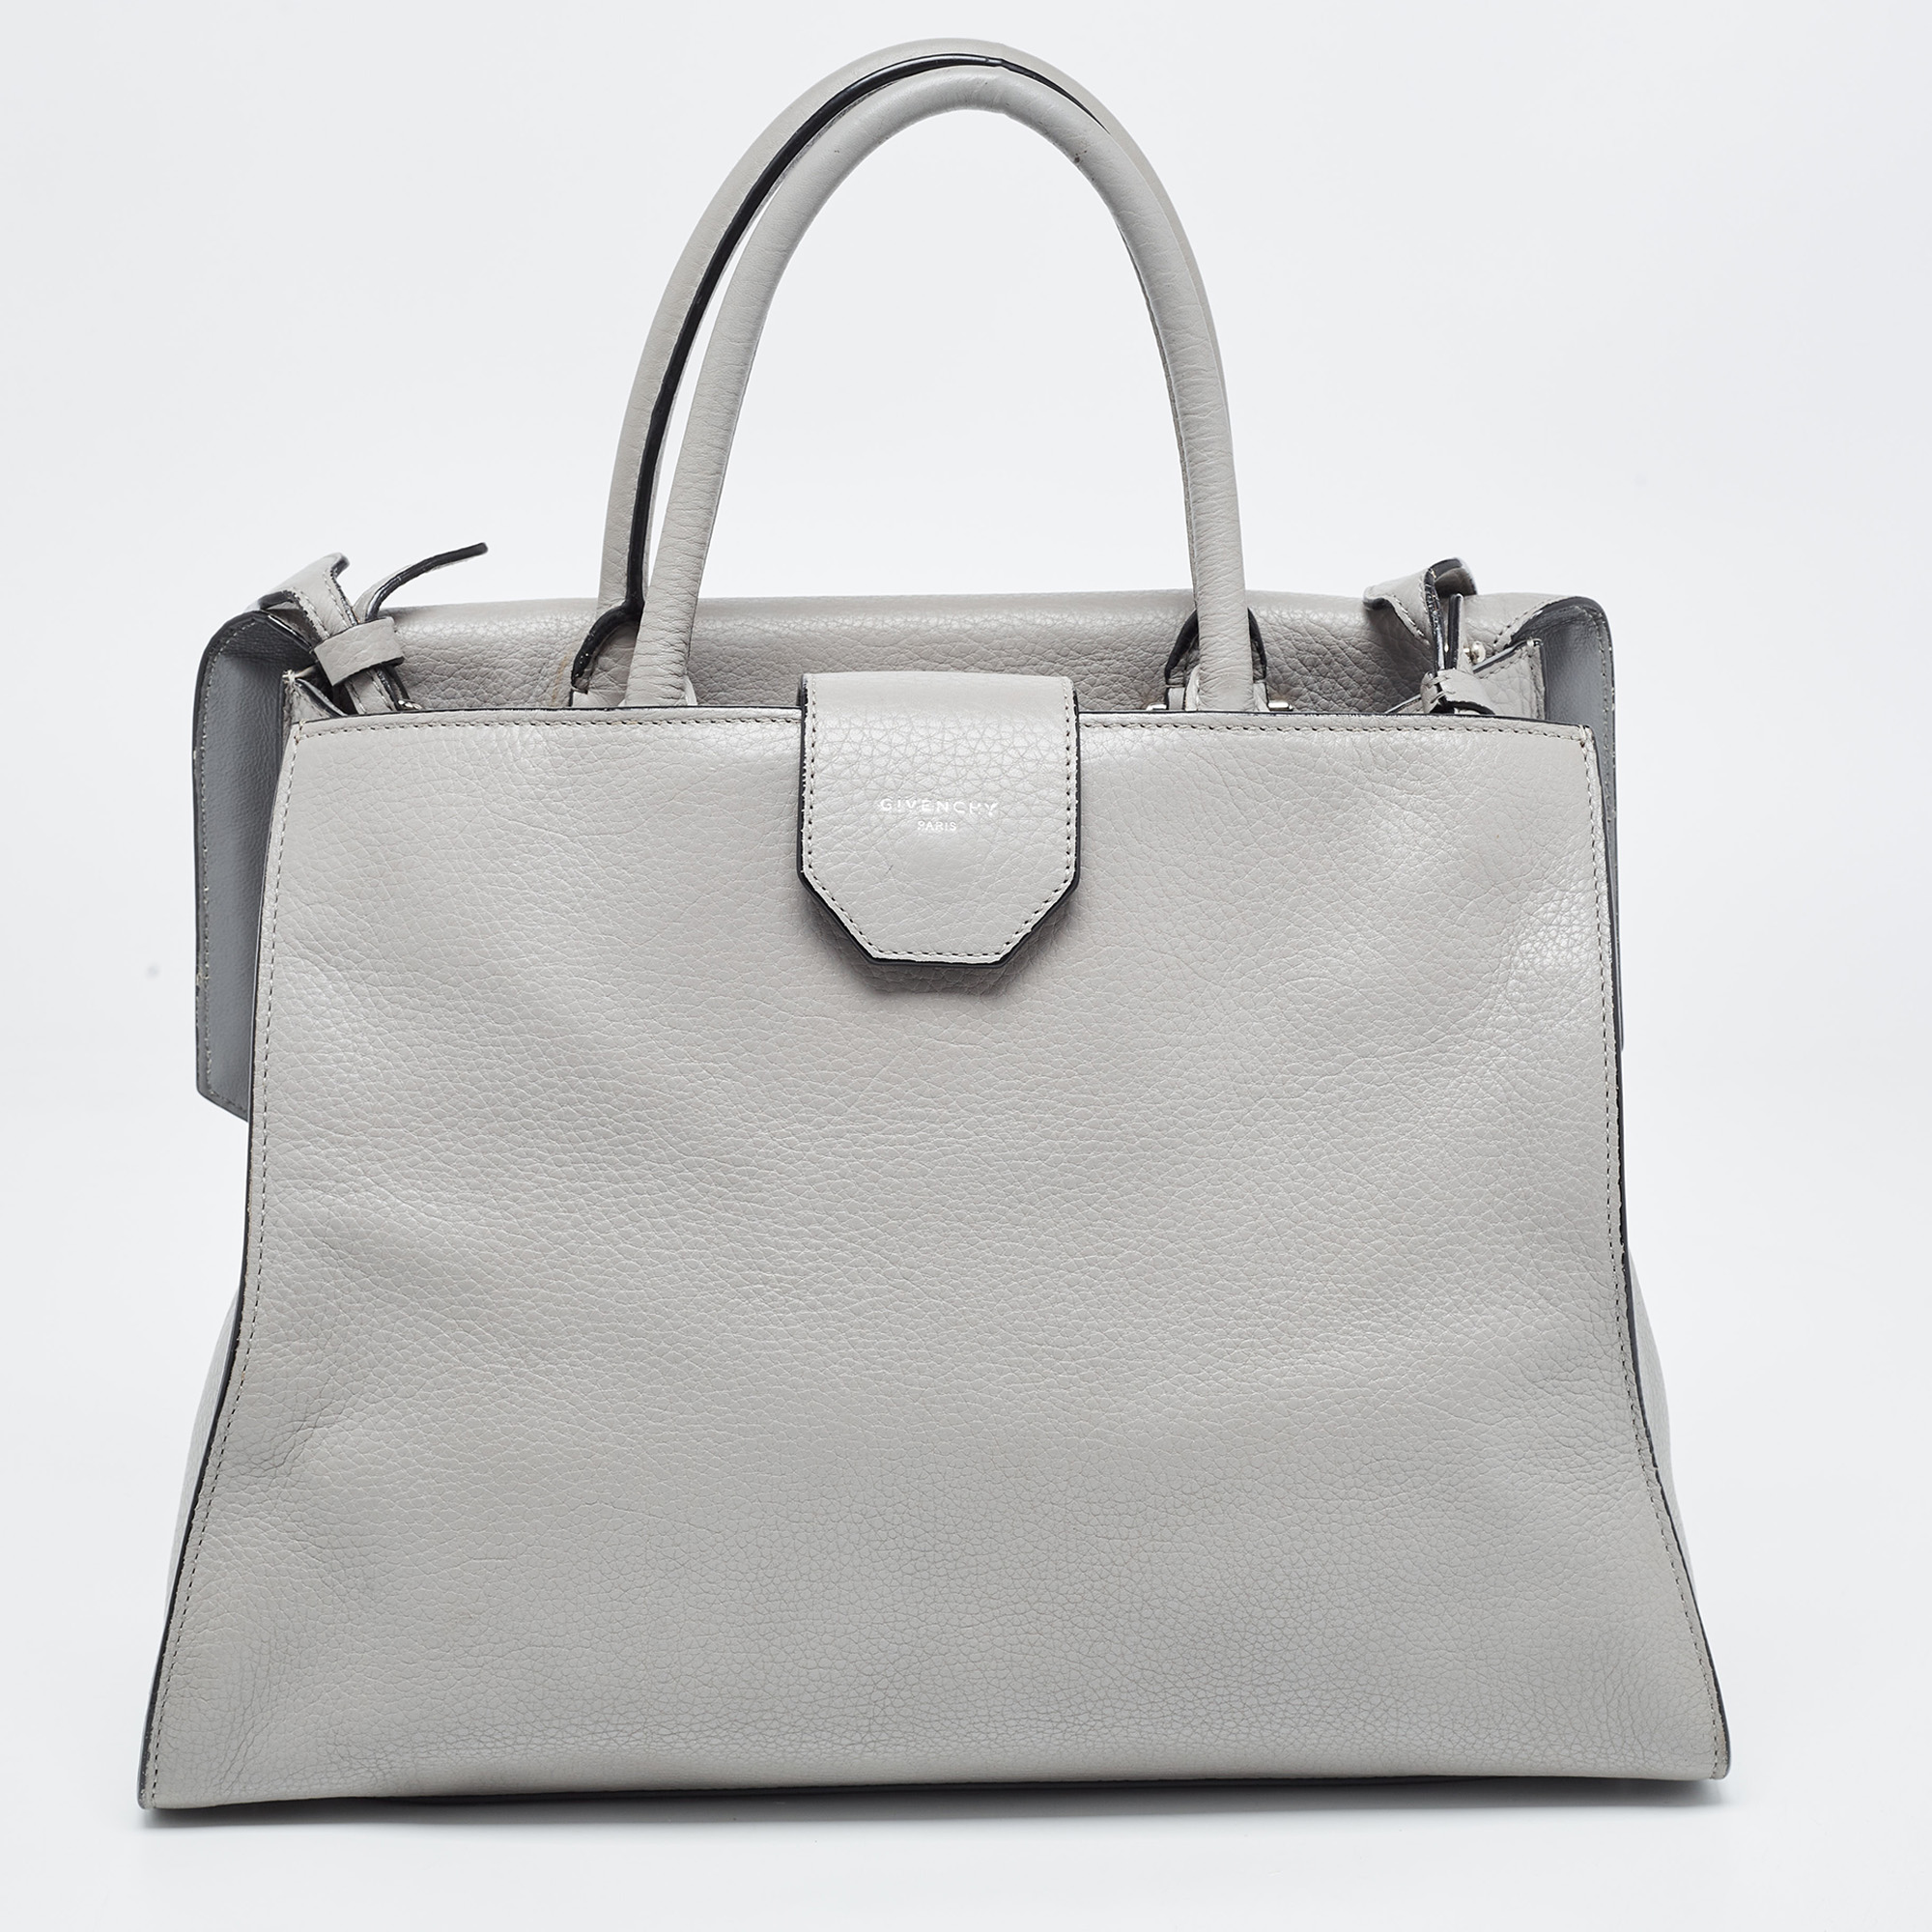 Givenchy Grey Leather Medium Obsedia Tote